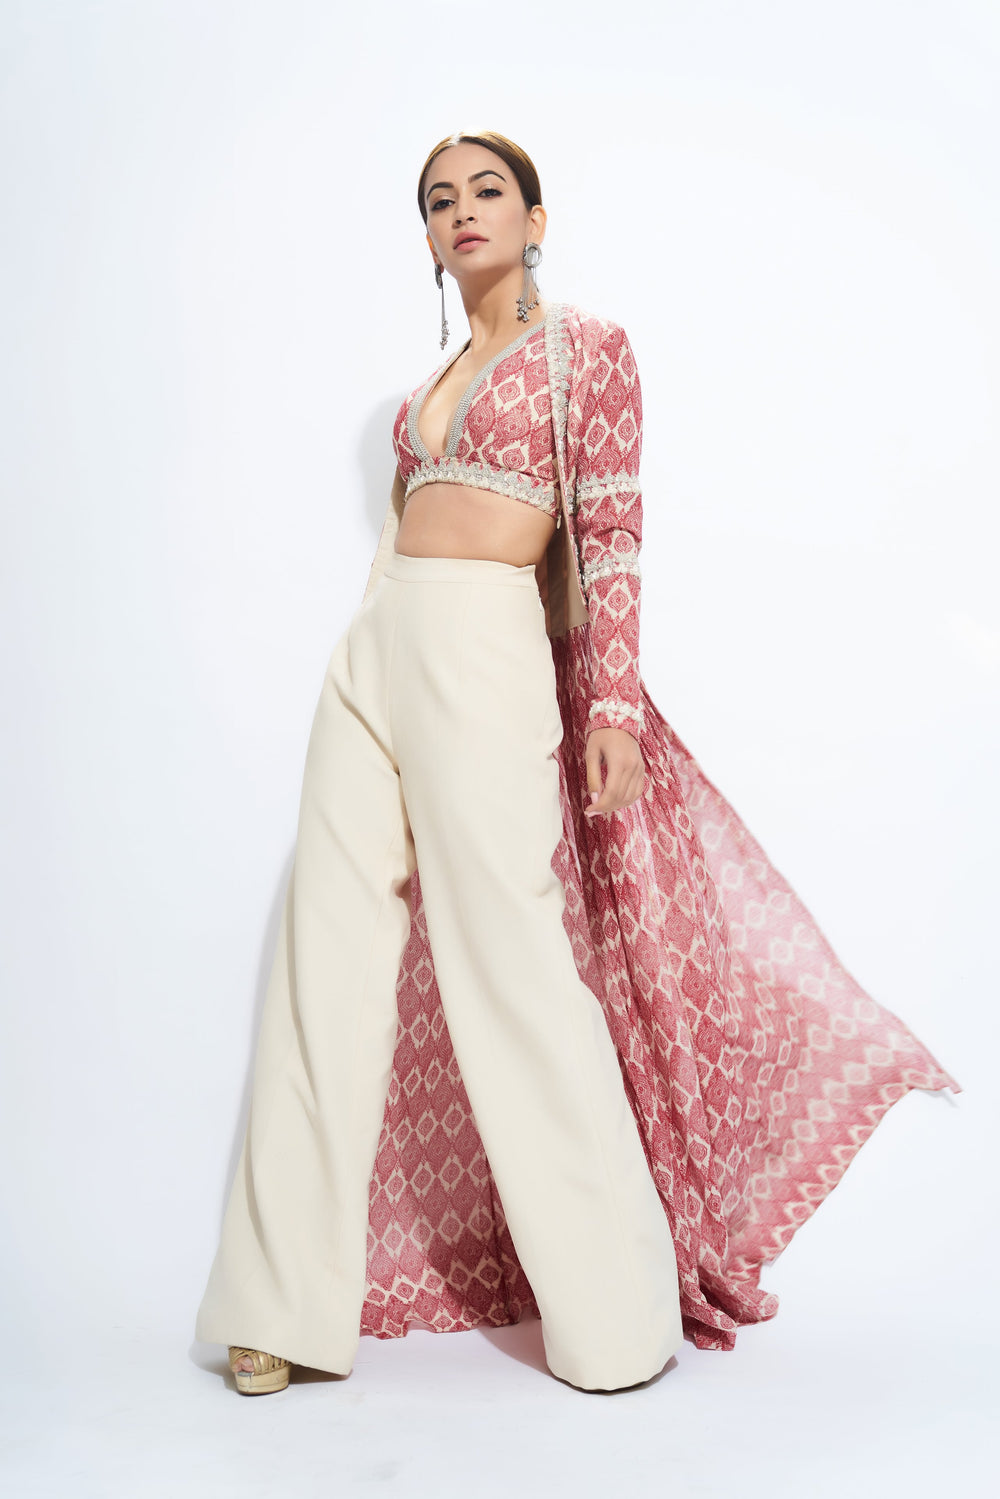 A Printed Embellished Blouse & Cape With Trousers - BHUMIKA SHARMA